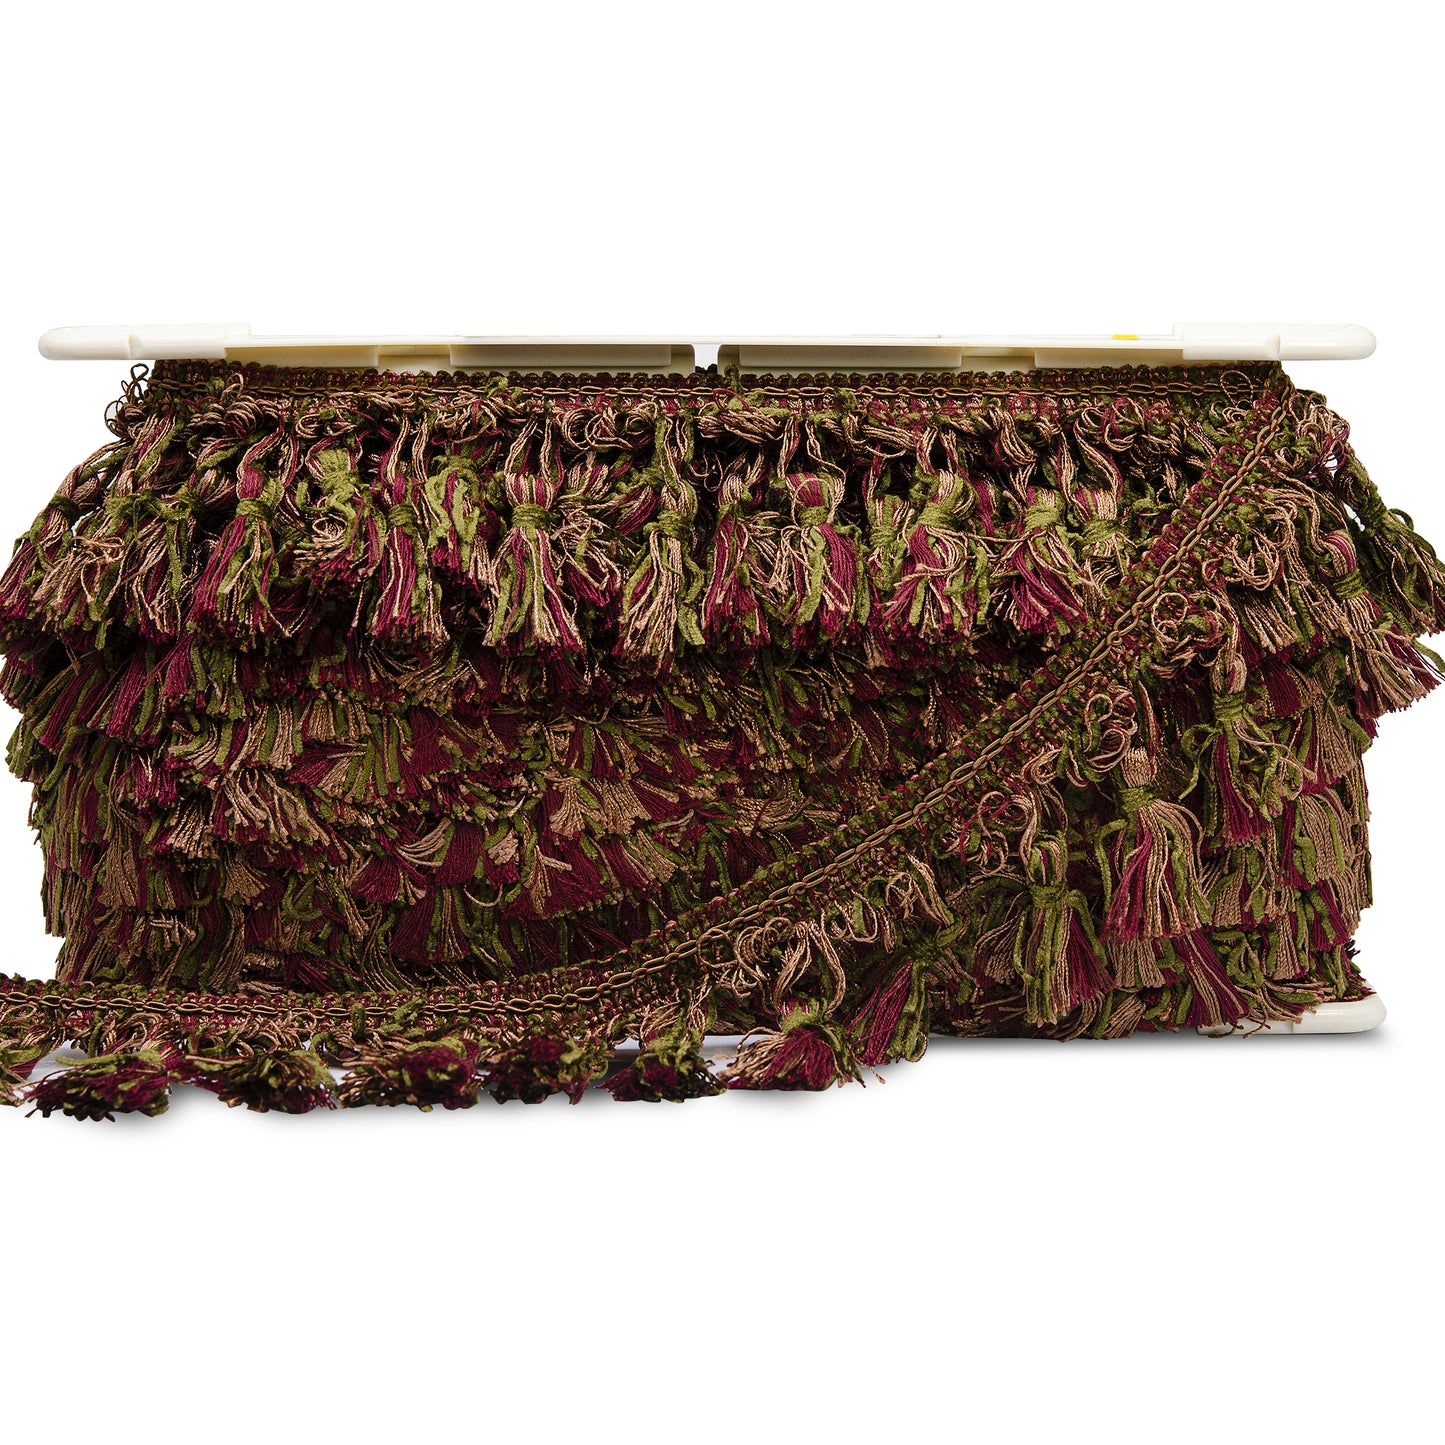 Conso Multicolored Tassel Fringe Trim (Sold by the Yard)